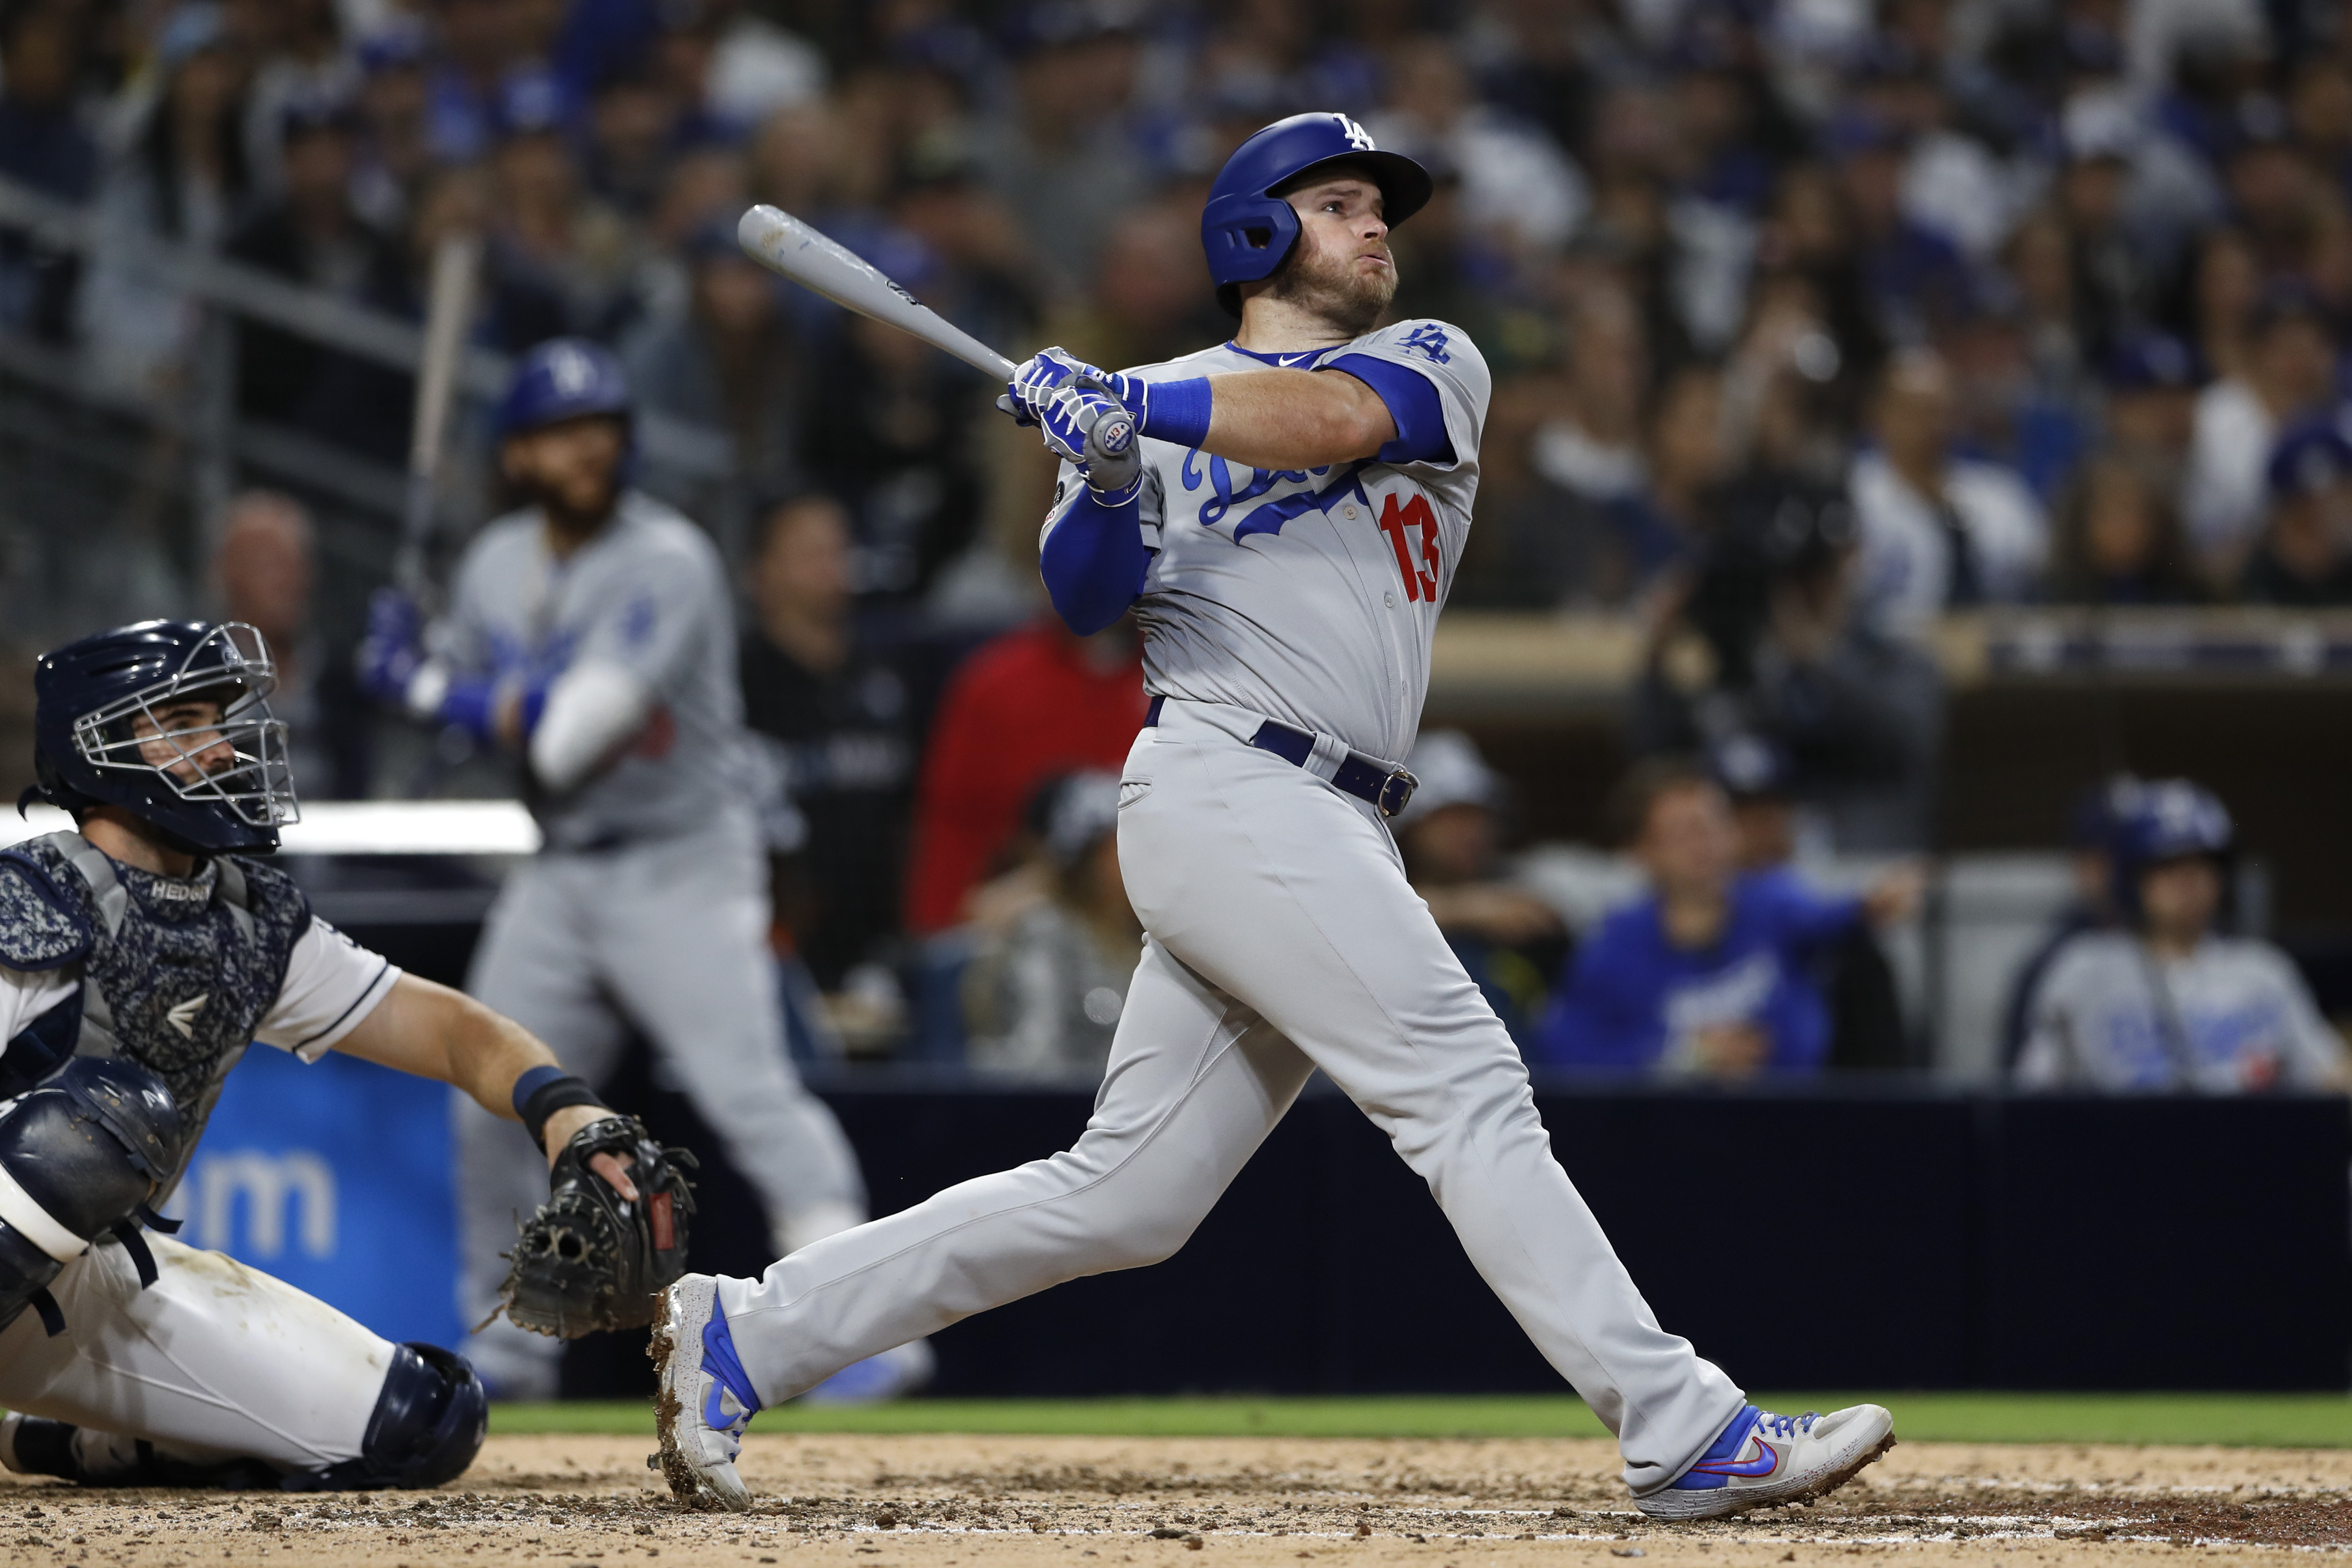 Verdugo’s bases-loaded walk lifts Dodgers over Padres